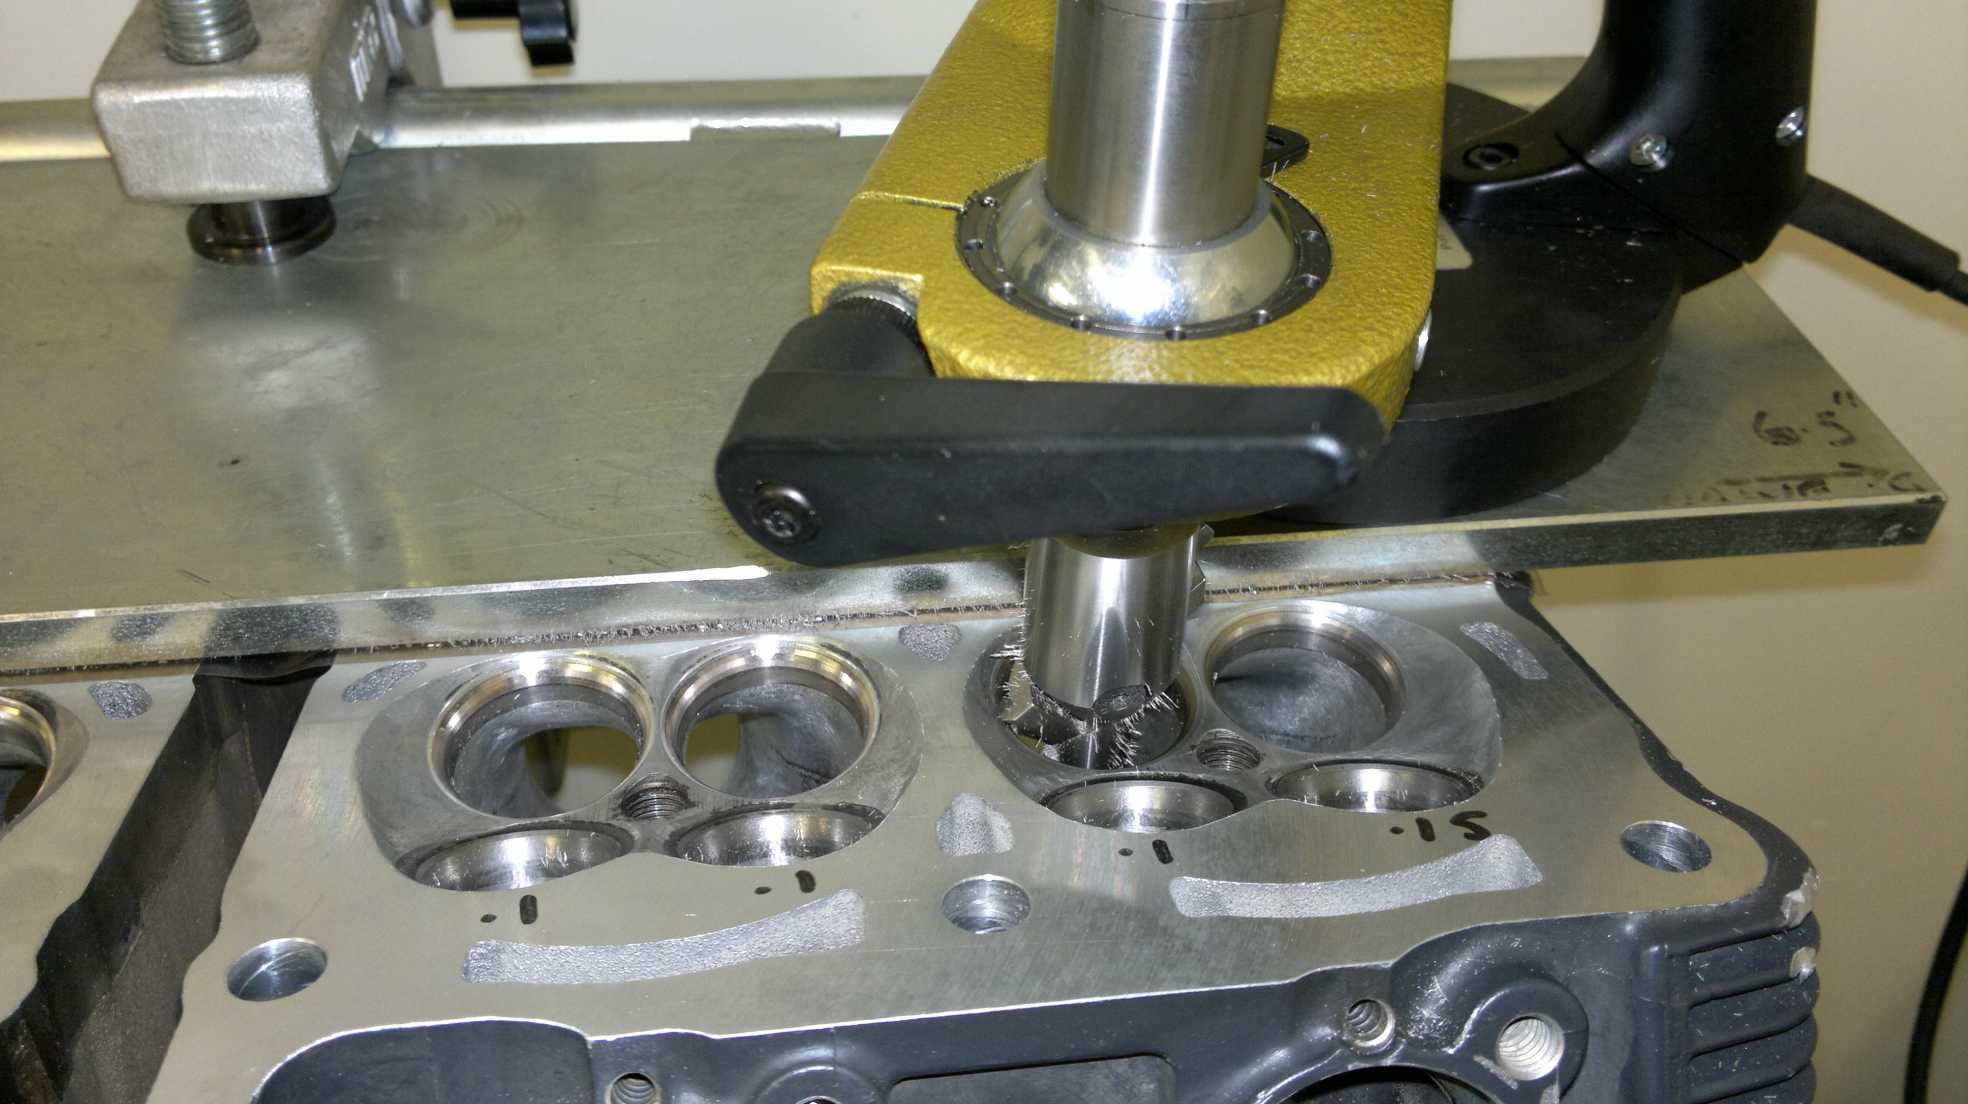 Precision valve seat machining of ported motorcycle cylinder head.